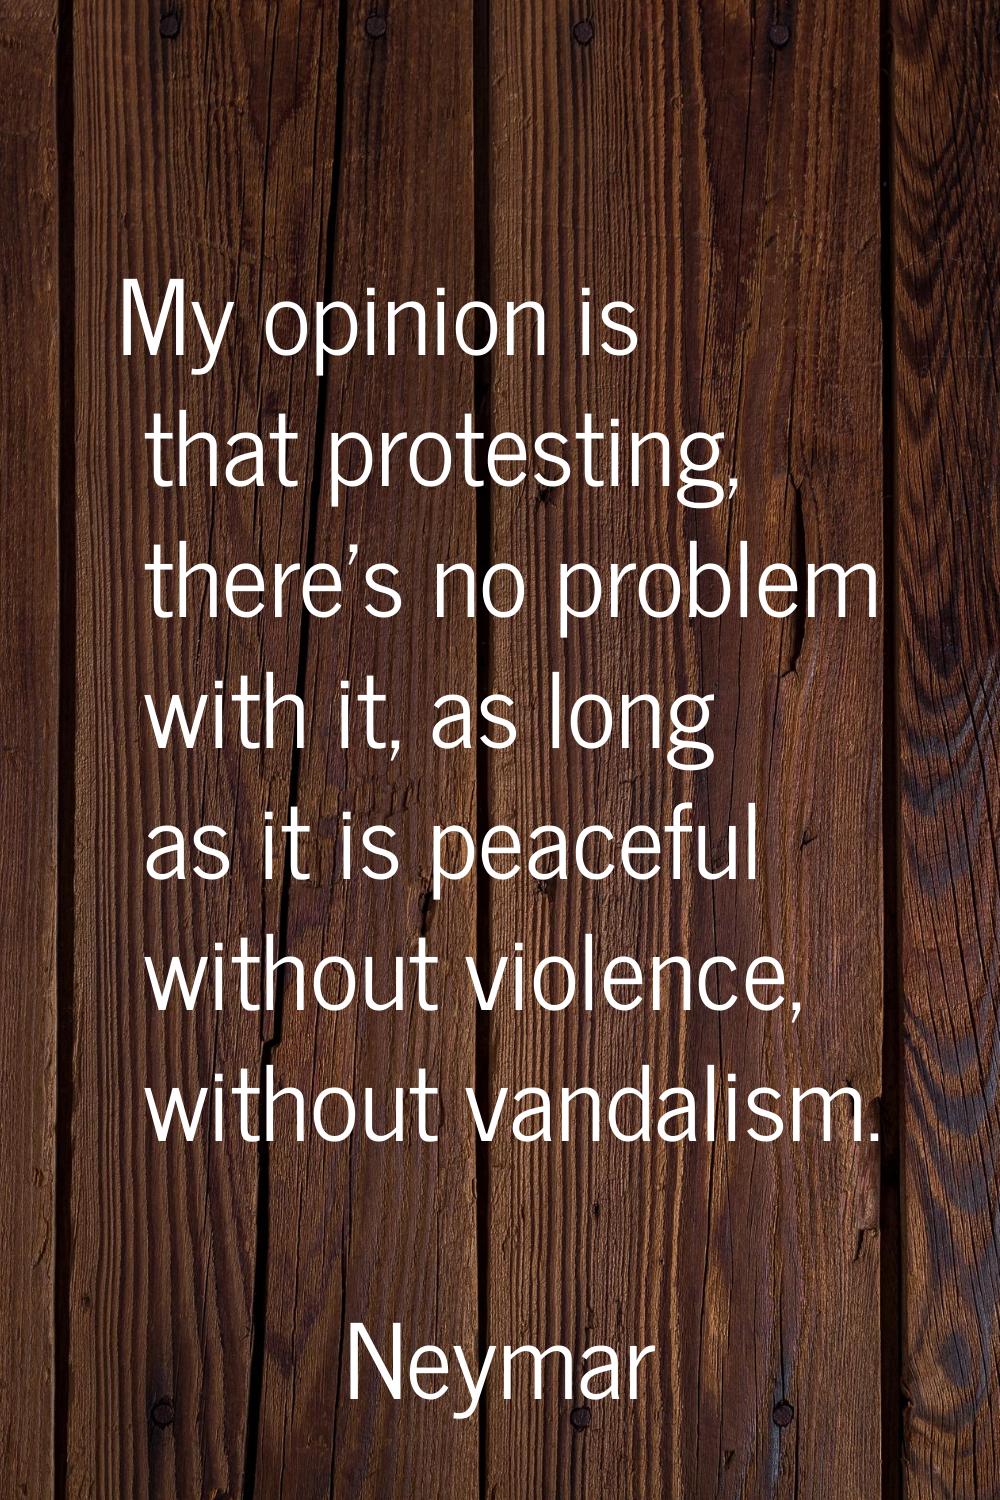 My opinion is that protesting, there's no problem with it, as long as it is peaceful without violen